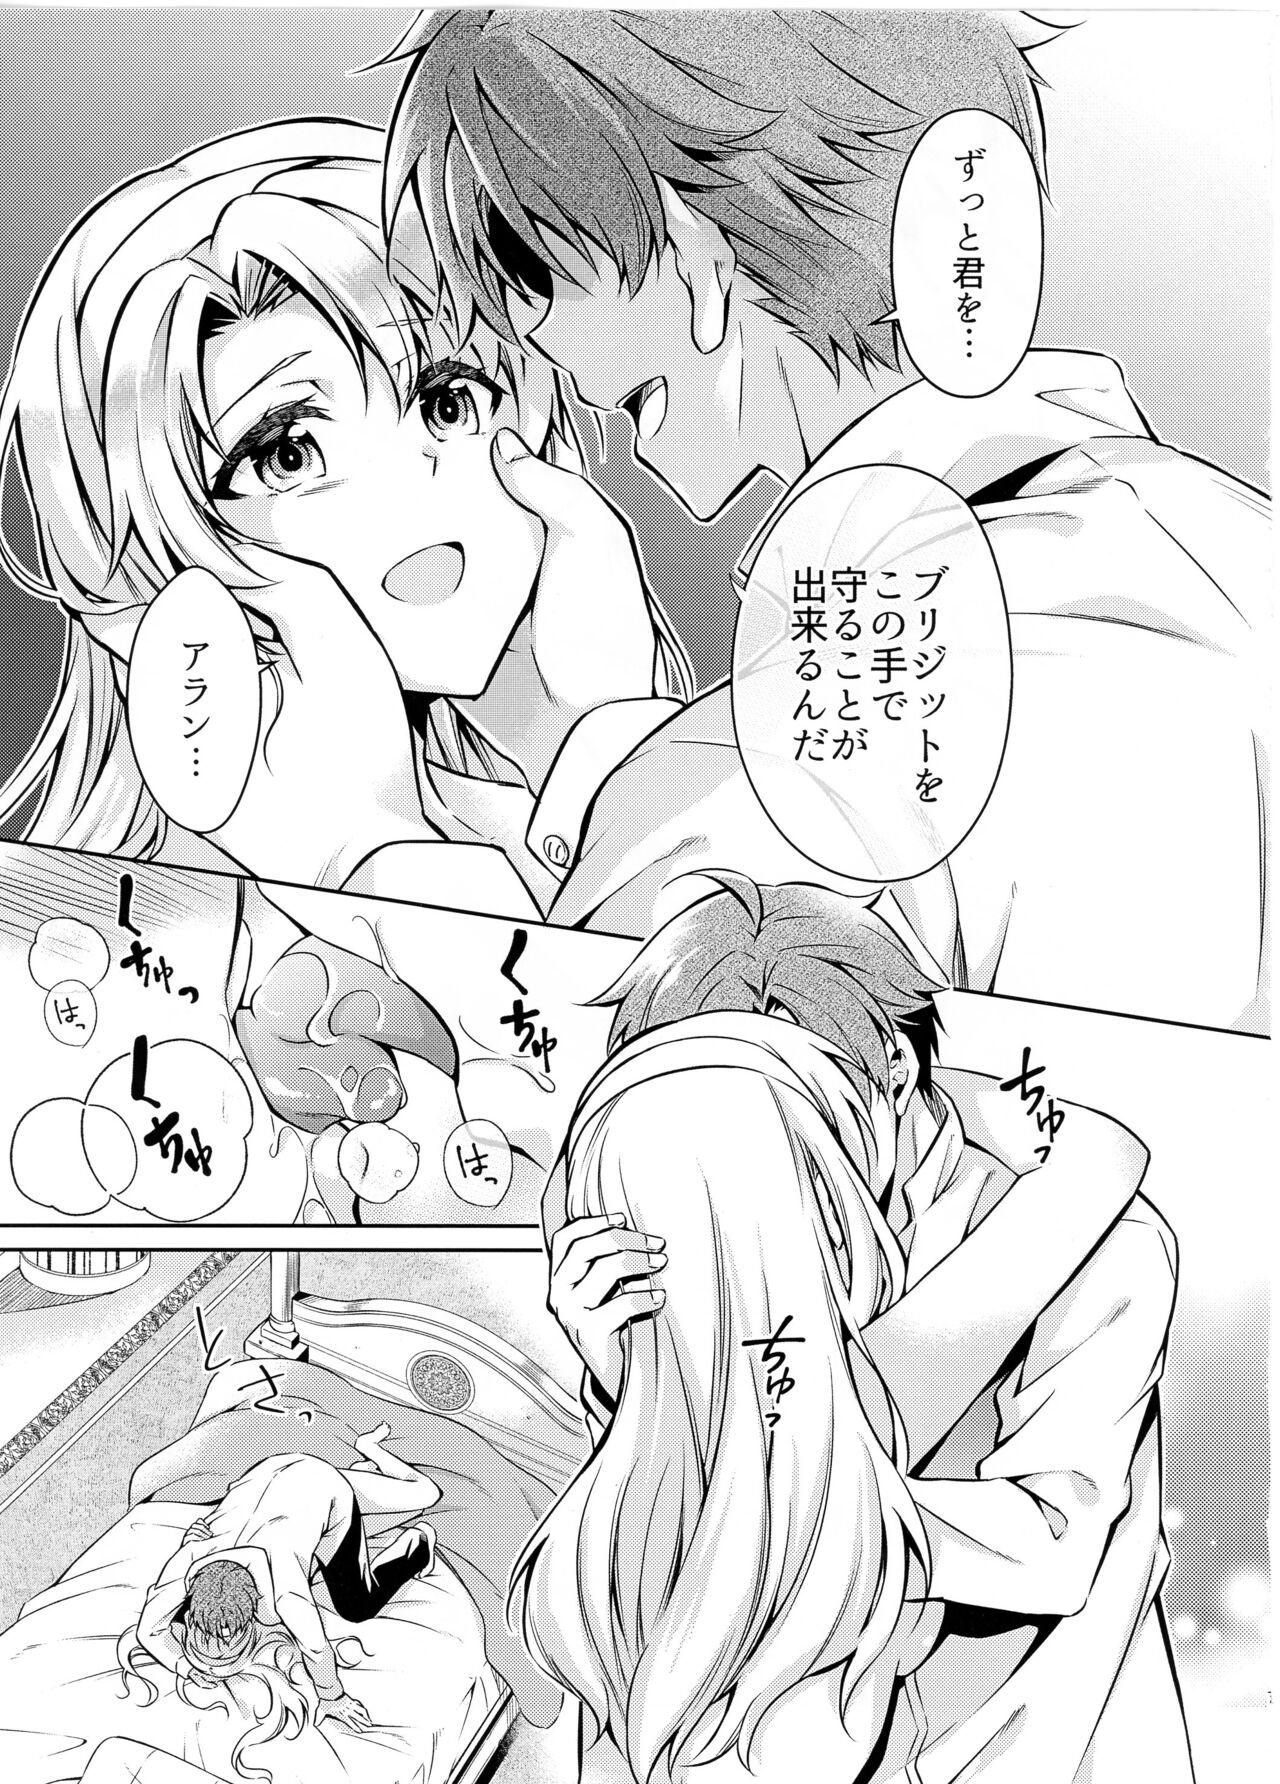 Socks Affection & Blessing - The legend of heroes | eiyuu densetsu Cock Sucking - Page 7